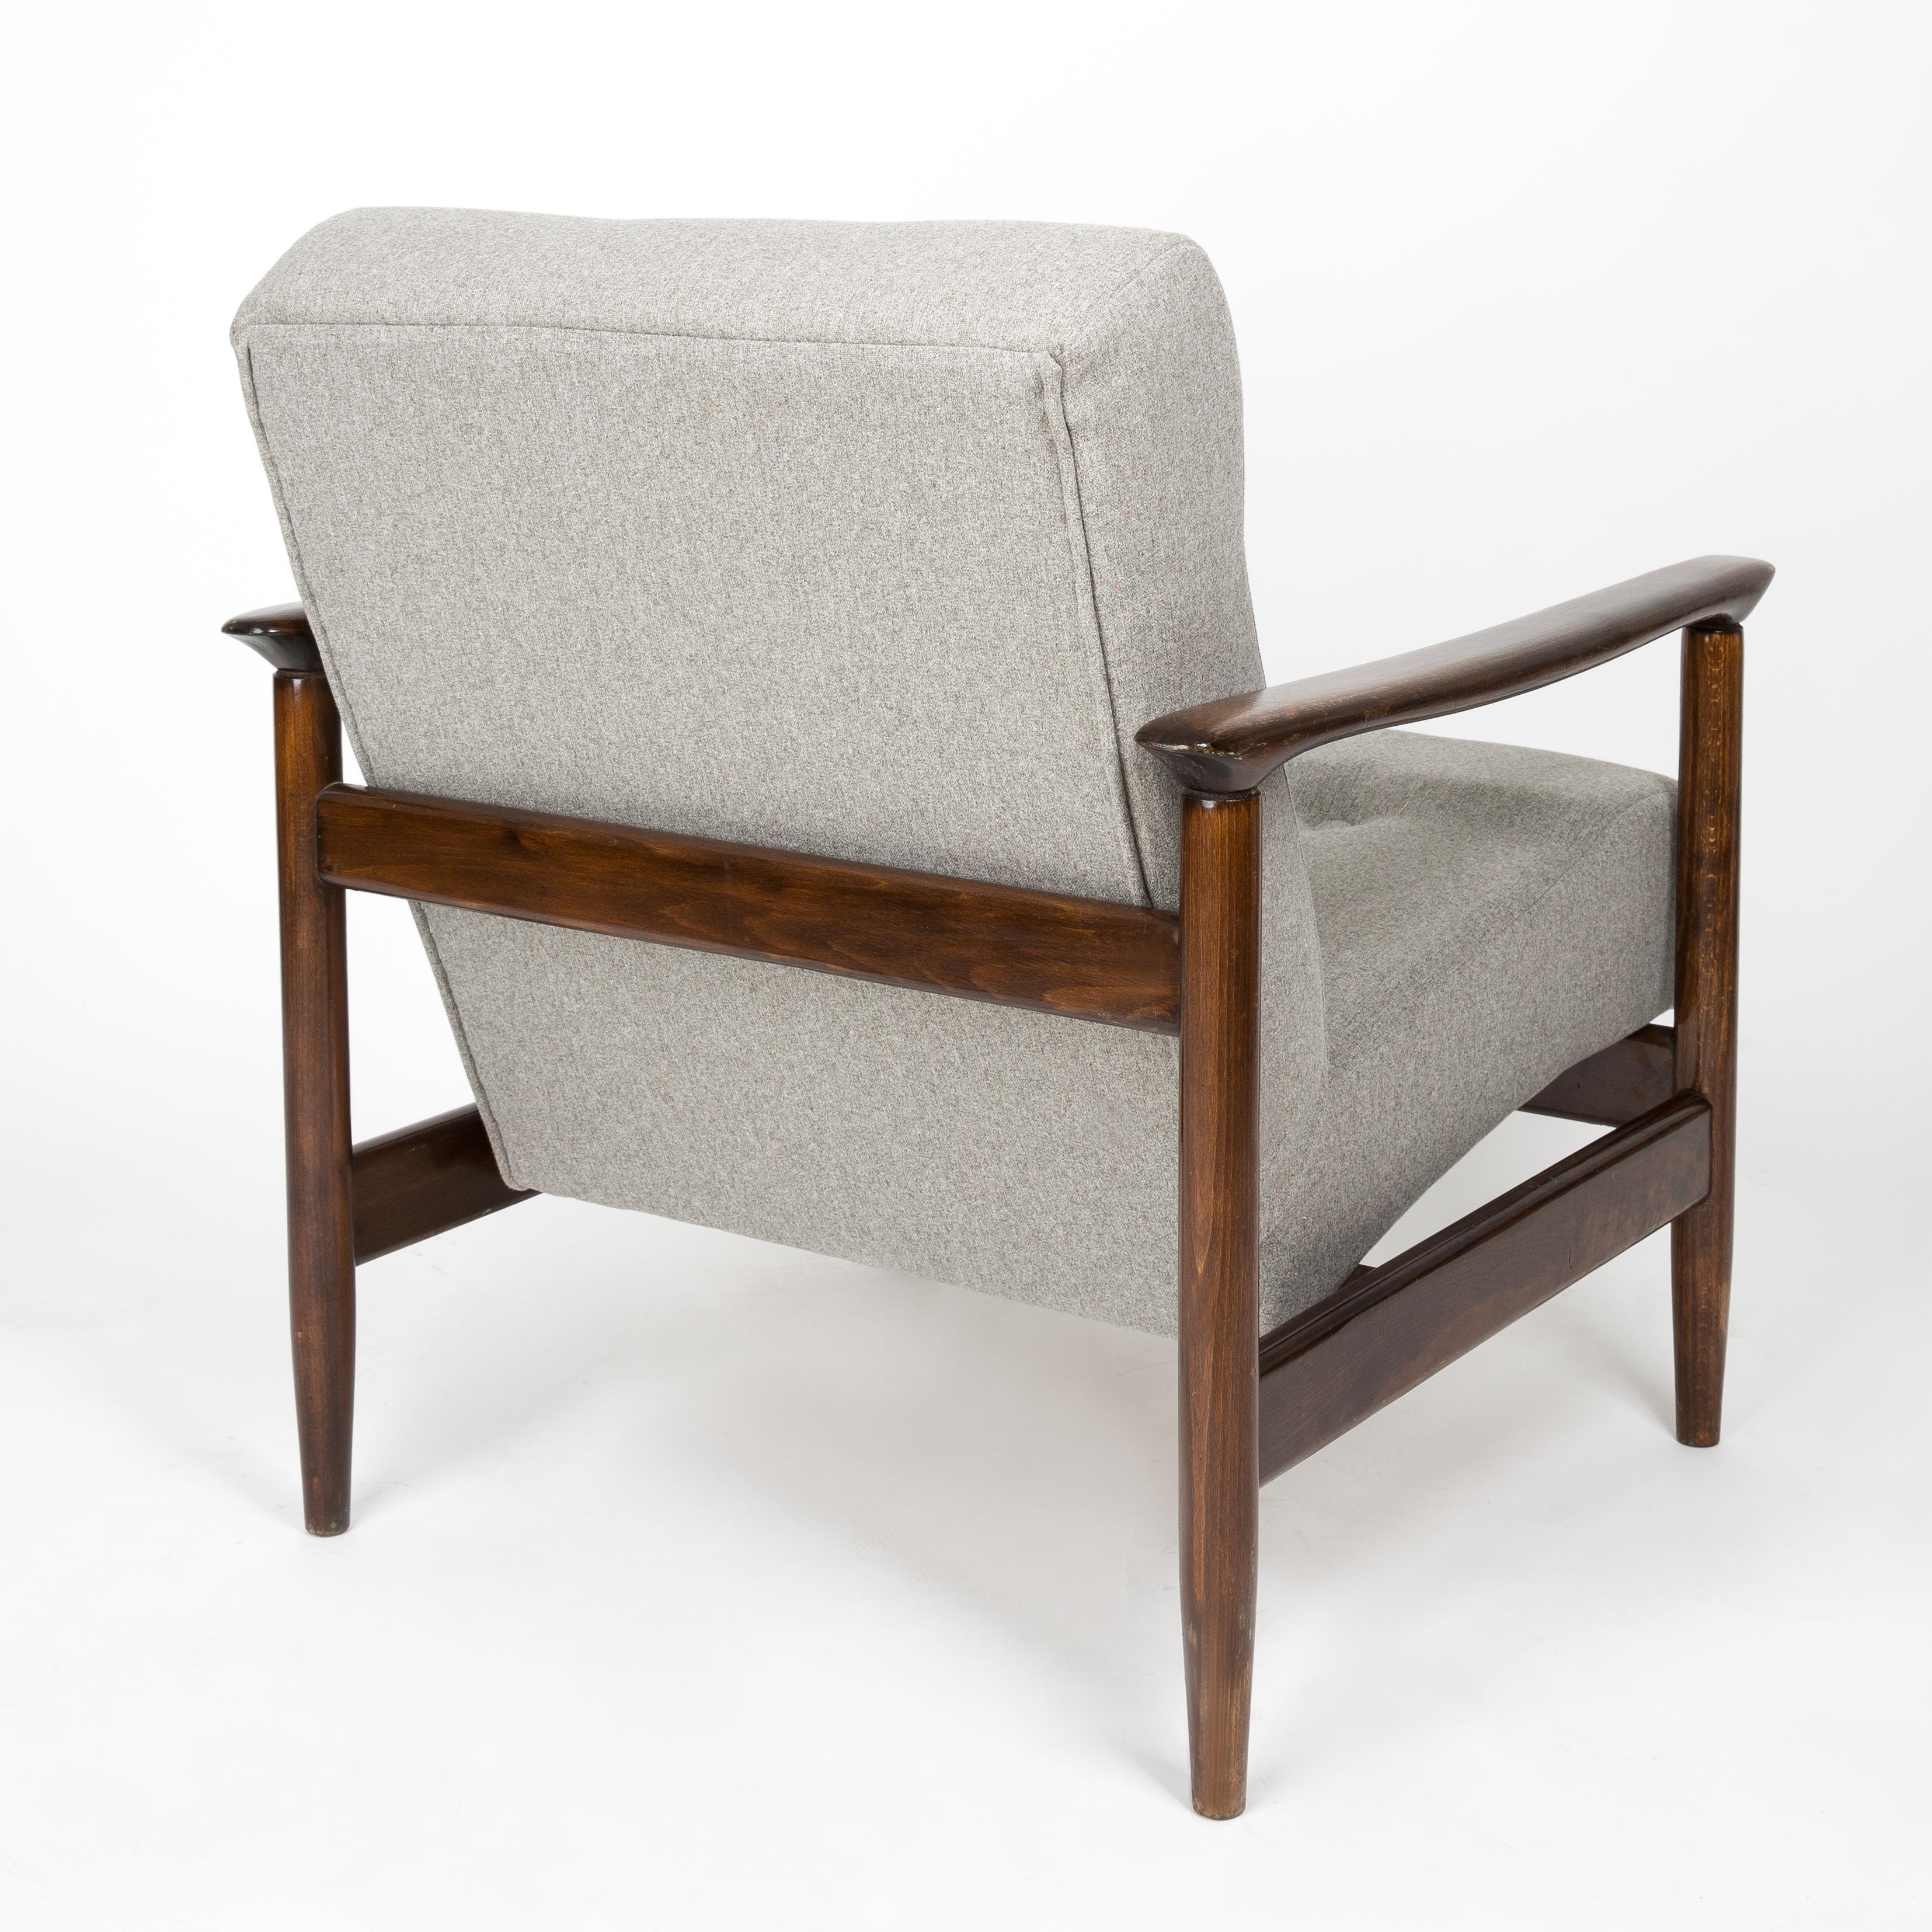 Set of Two Mid Century Beige Wool Armchairs, by Edmund Homa, Europe, 1960s For Sale 2